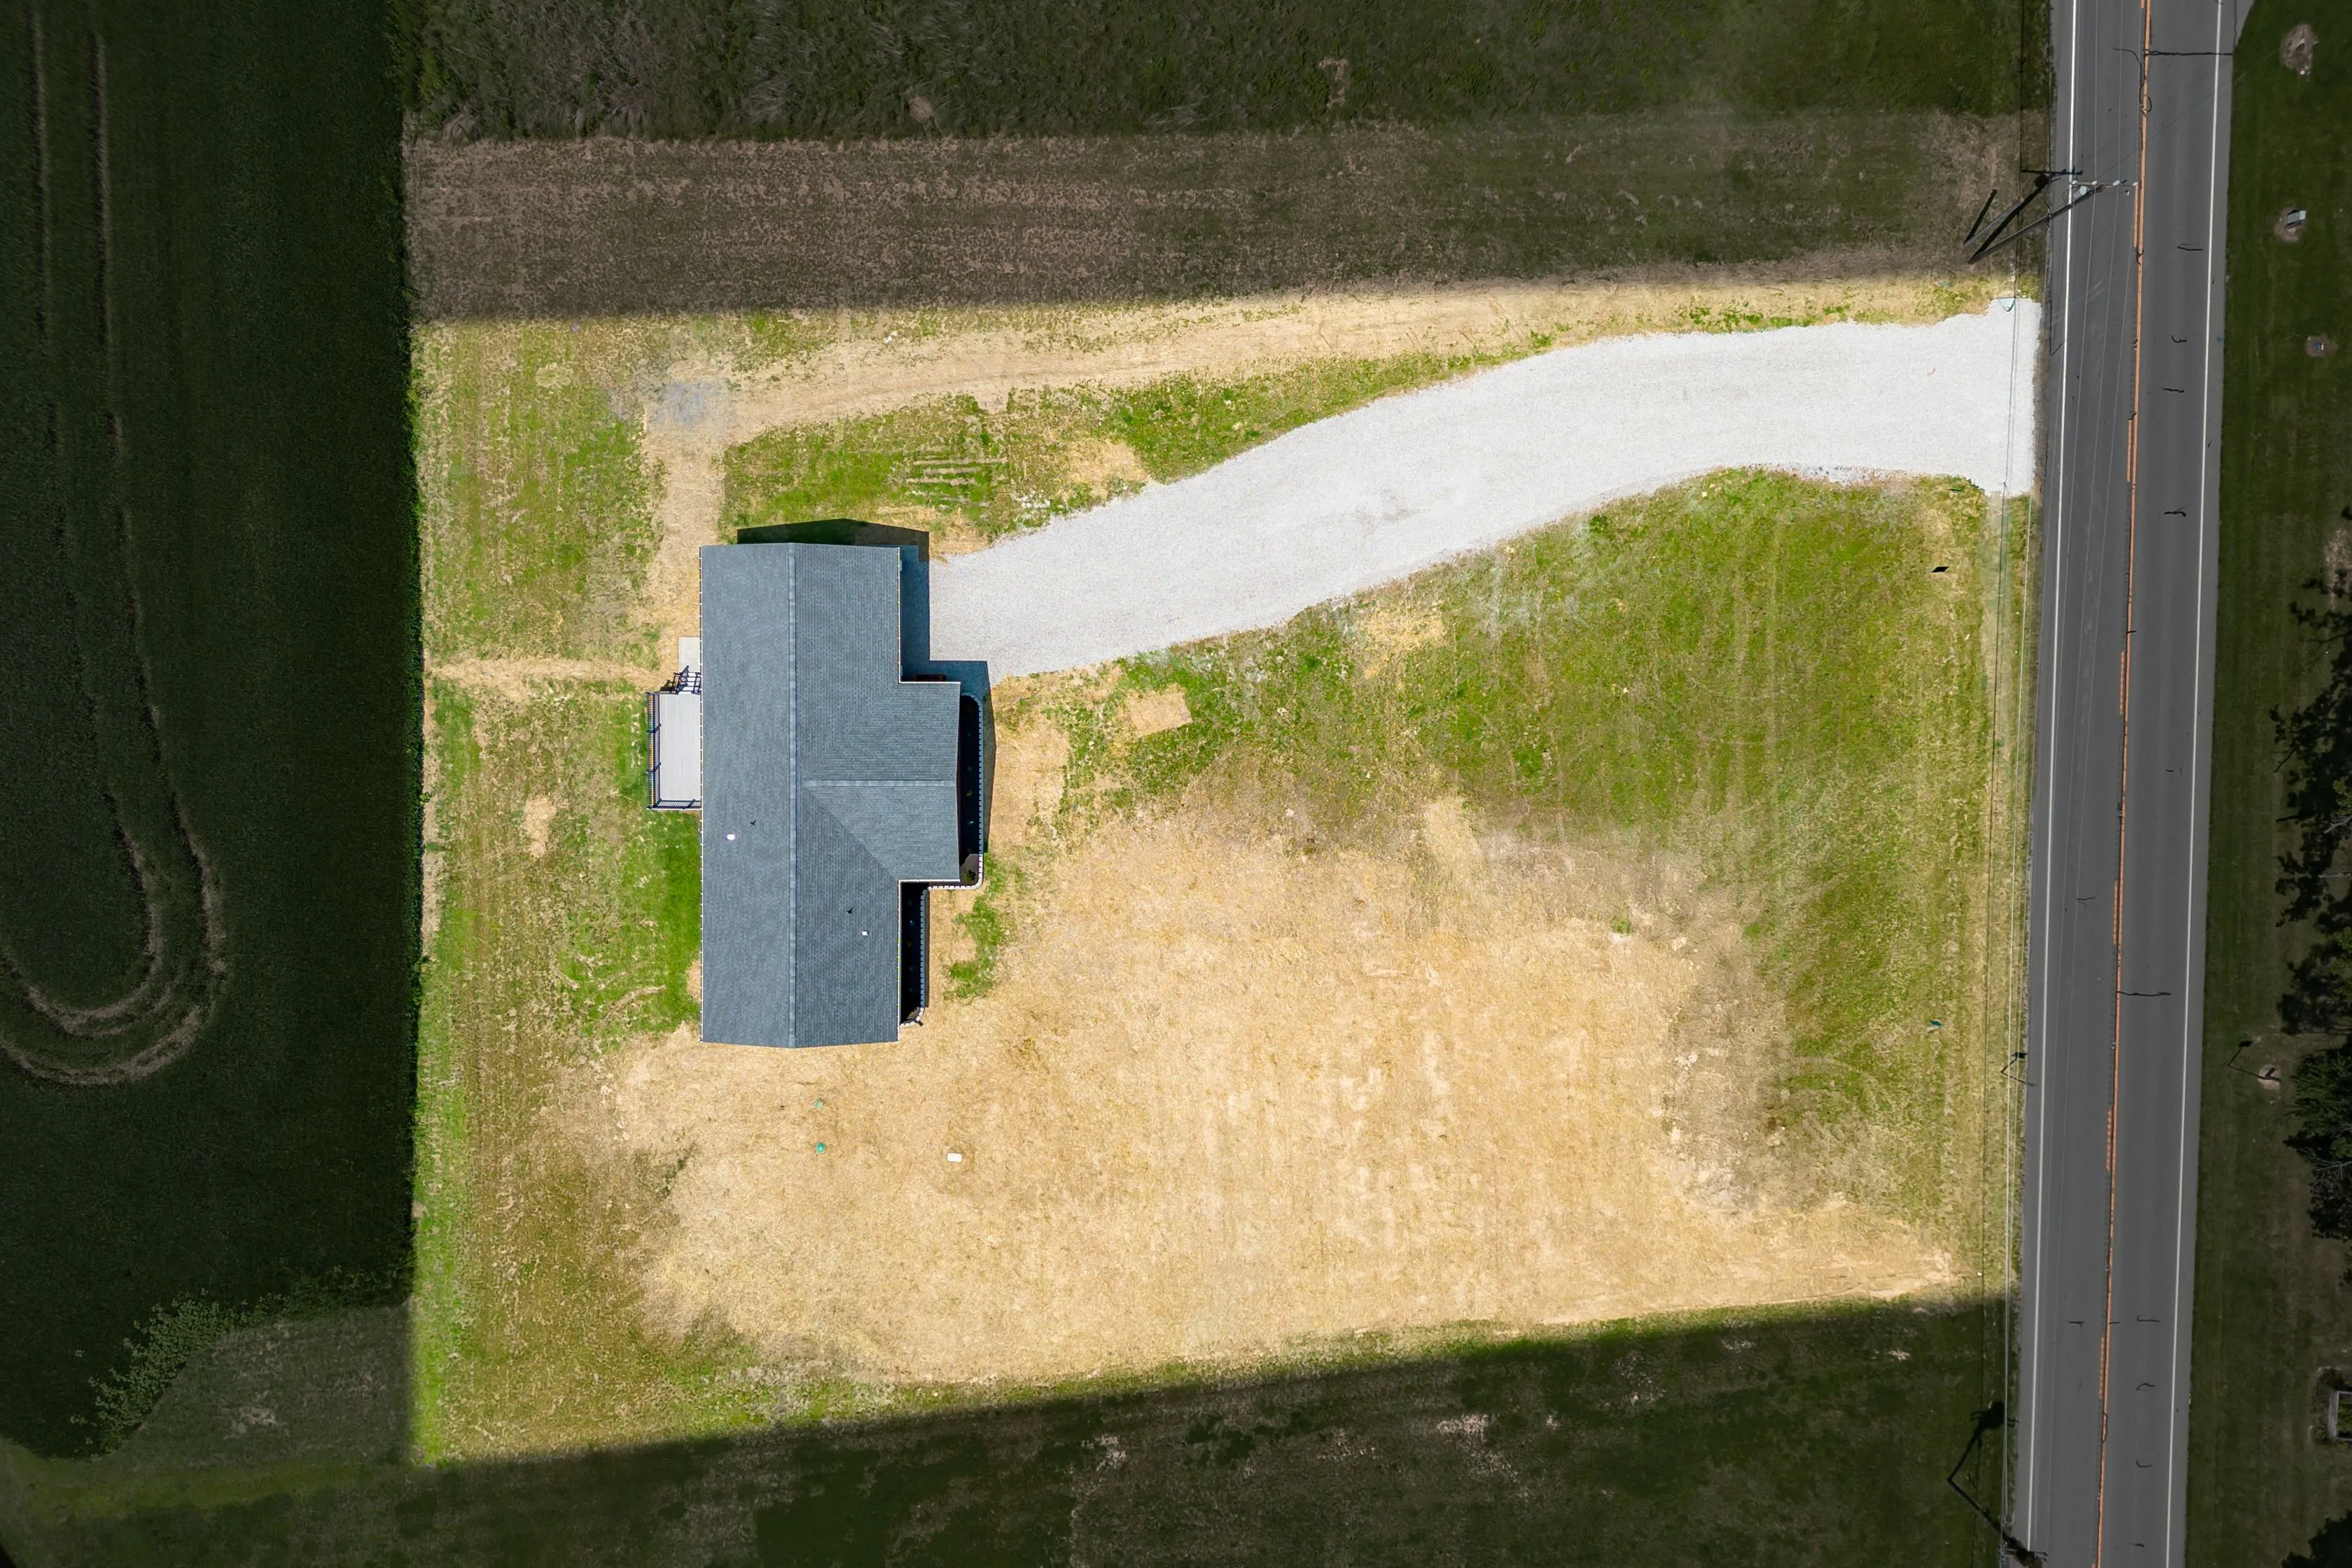 Aerial view of a house with a gray roof next to a country road, surrounded by patches of green grass and fields.